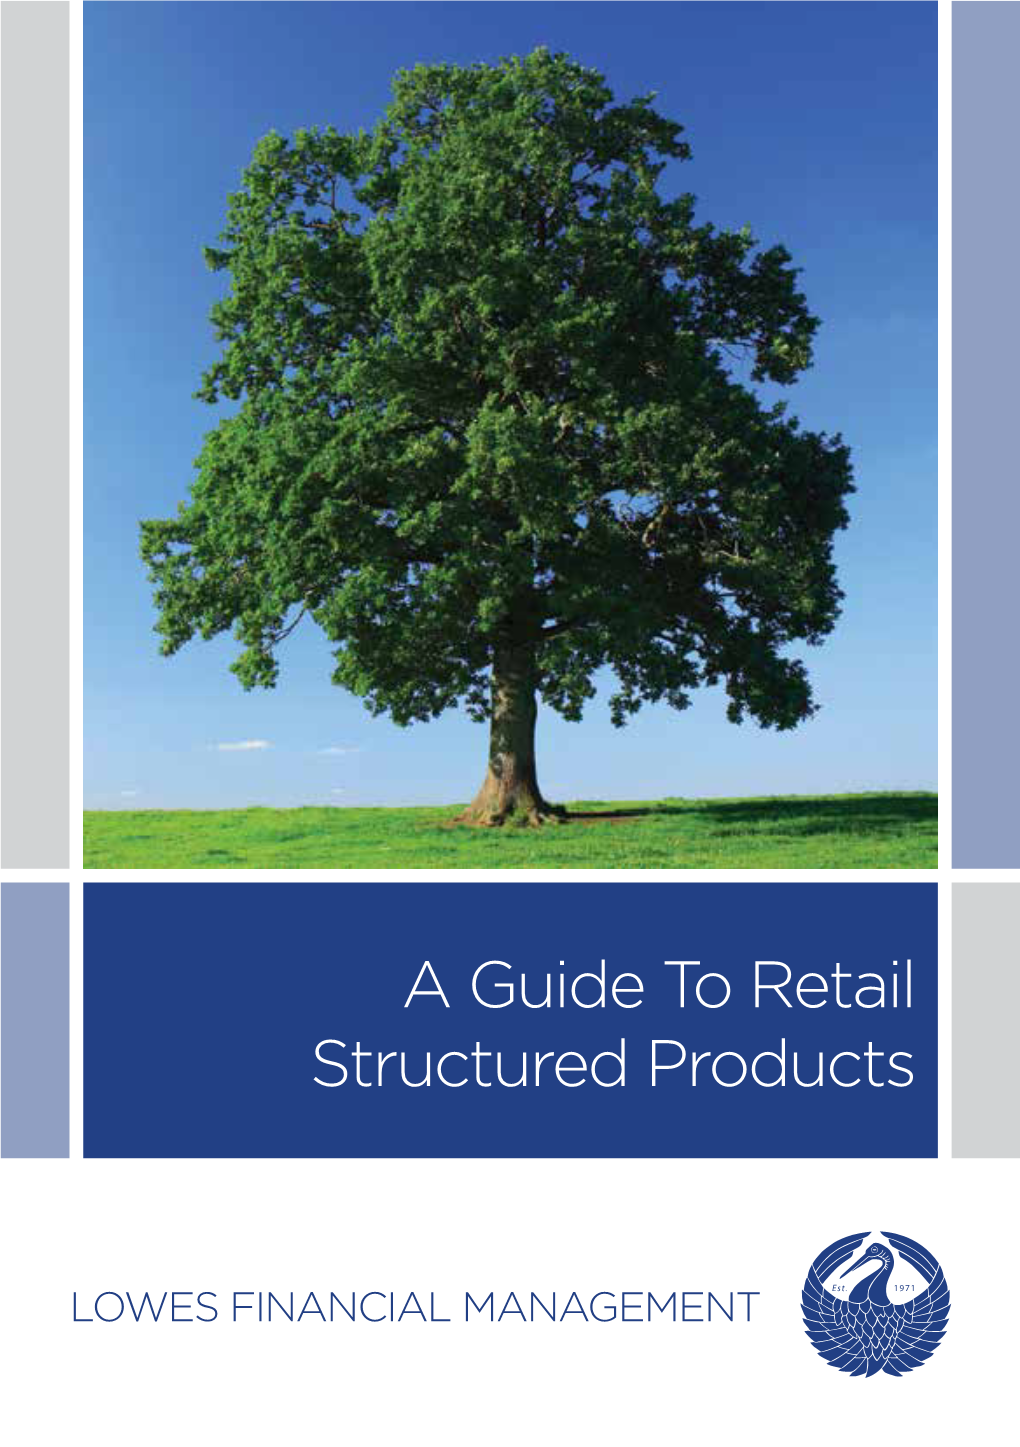 A Guide to Retail Structured Products